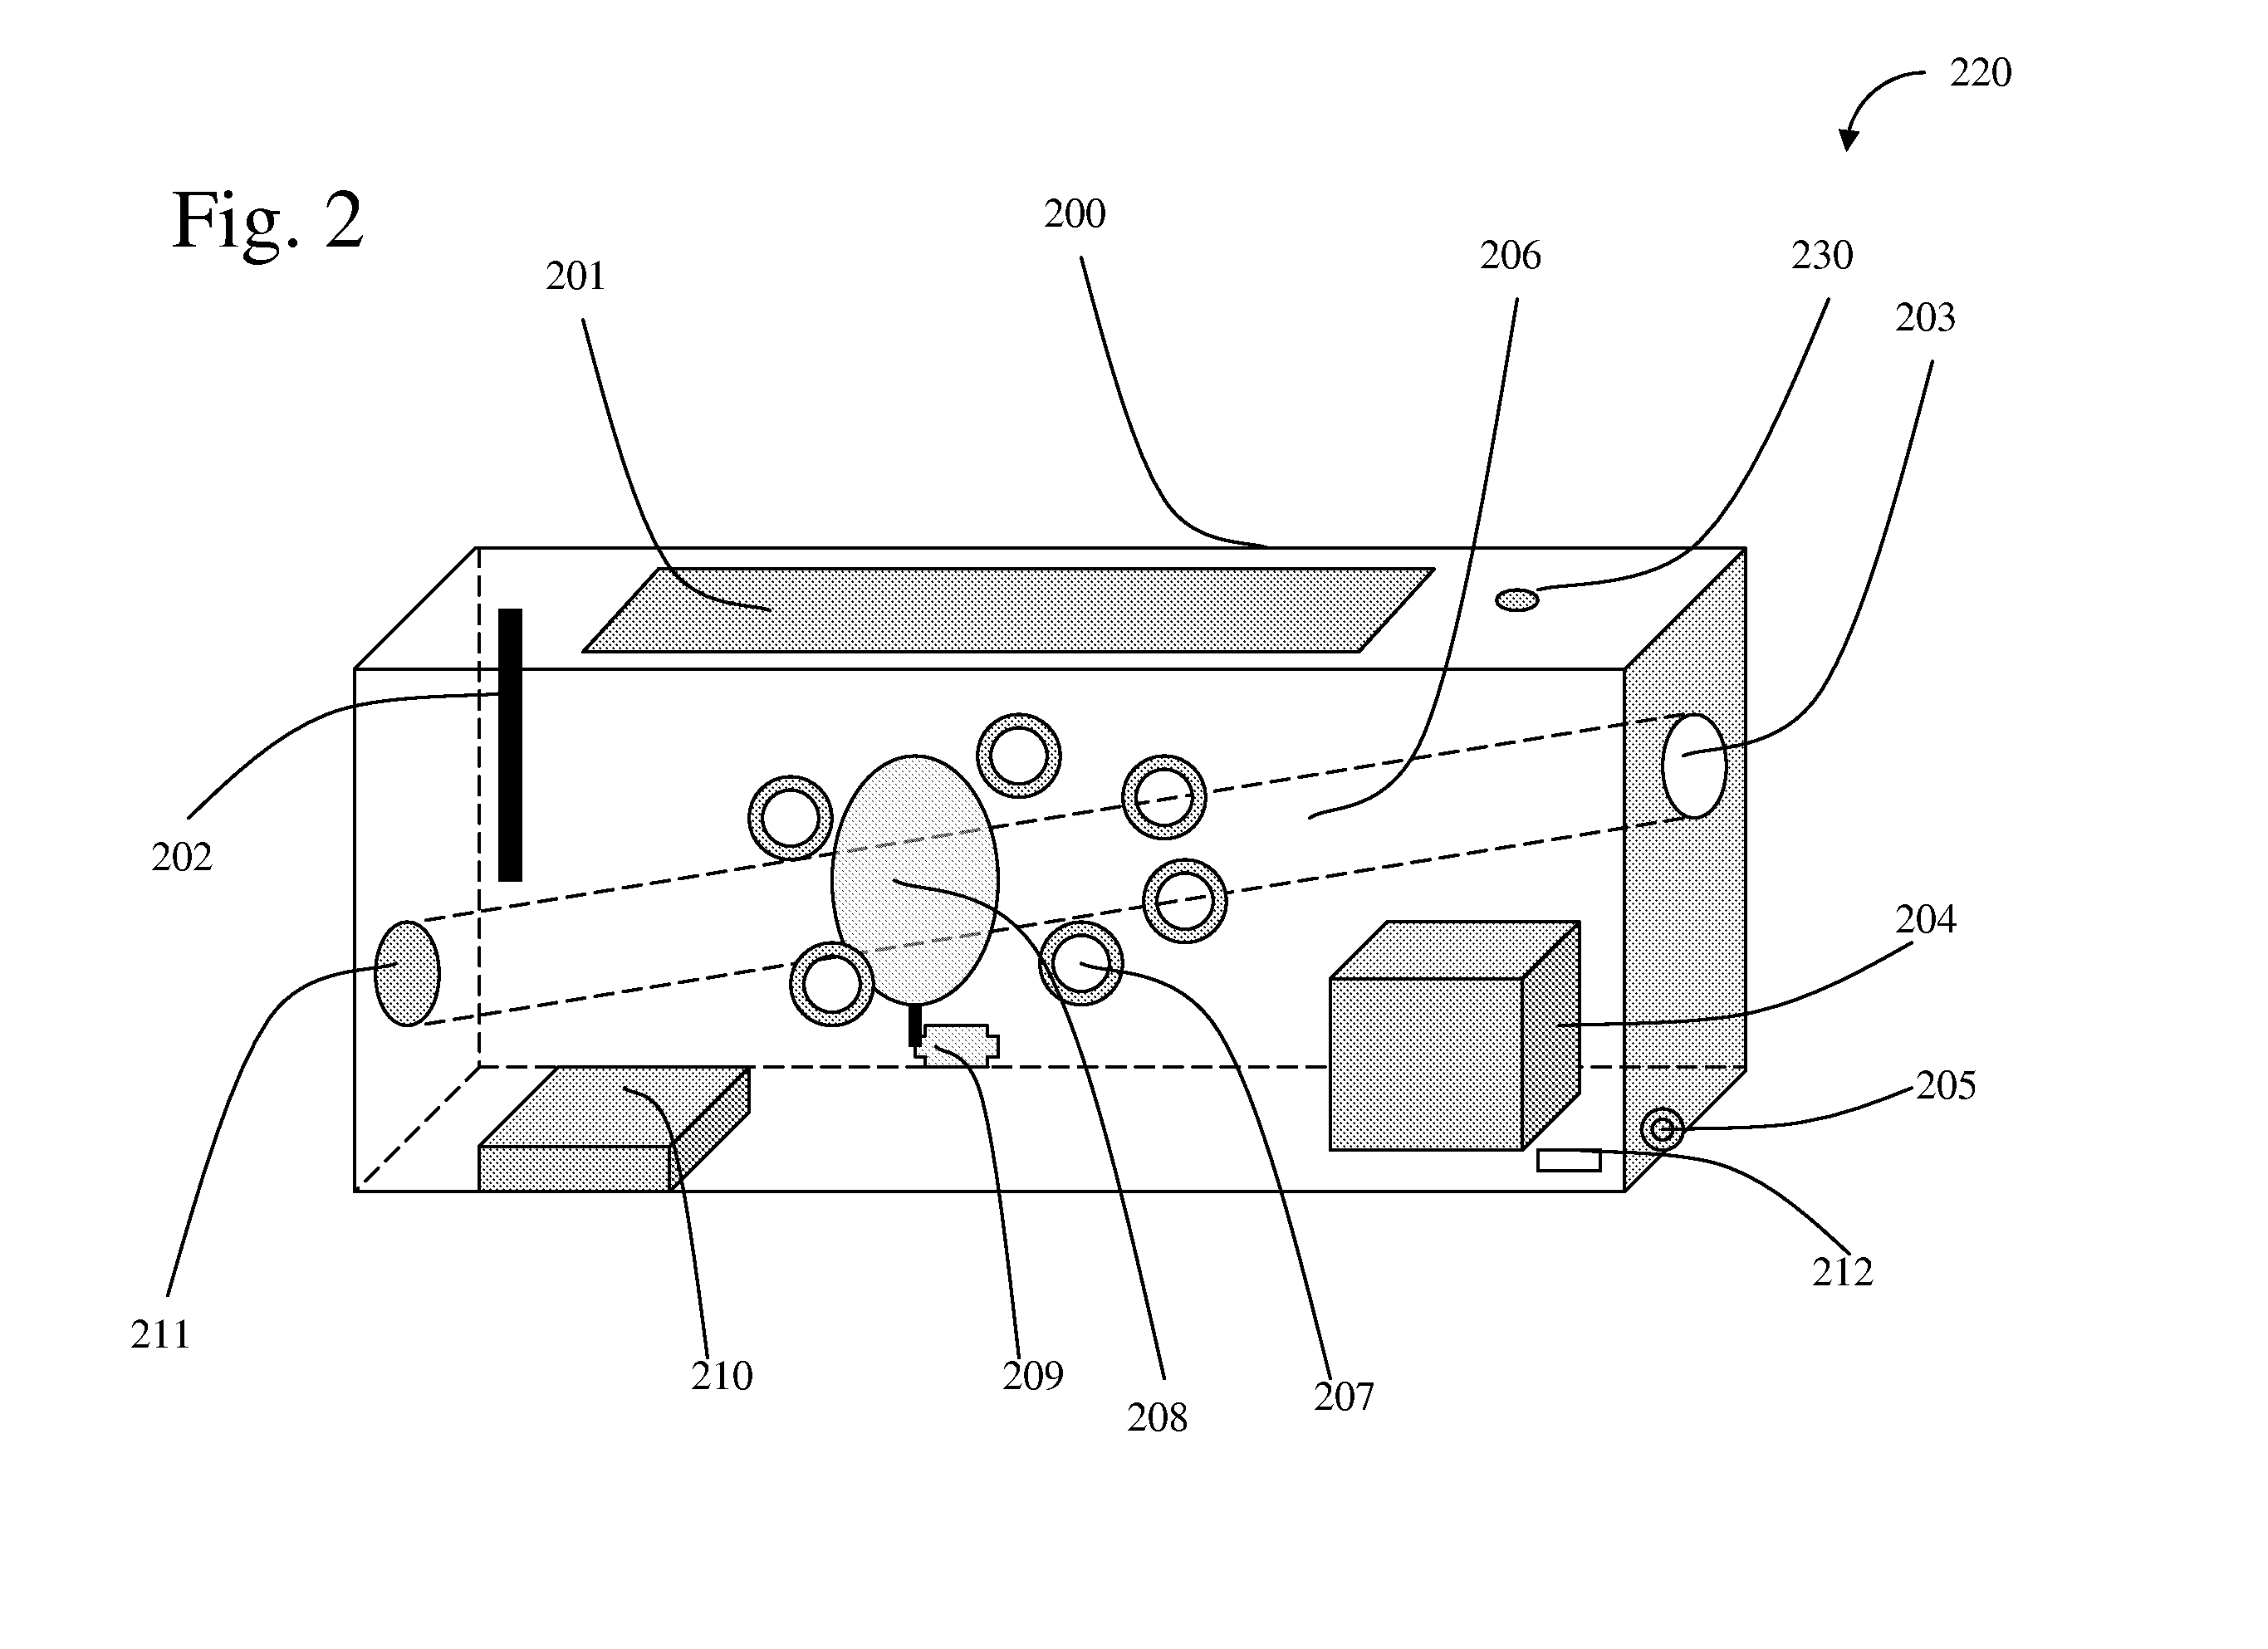 Apparatus and method for obtaining an identification of drugs for enhanced safety